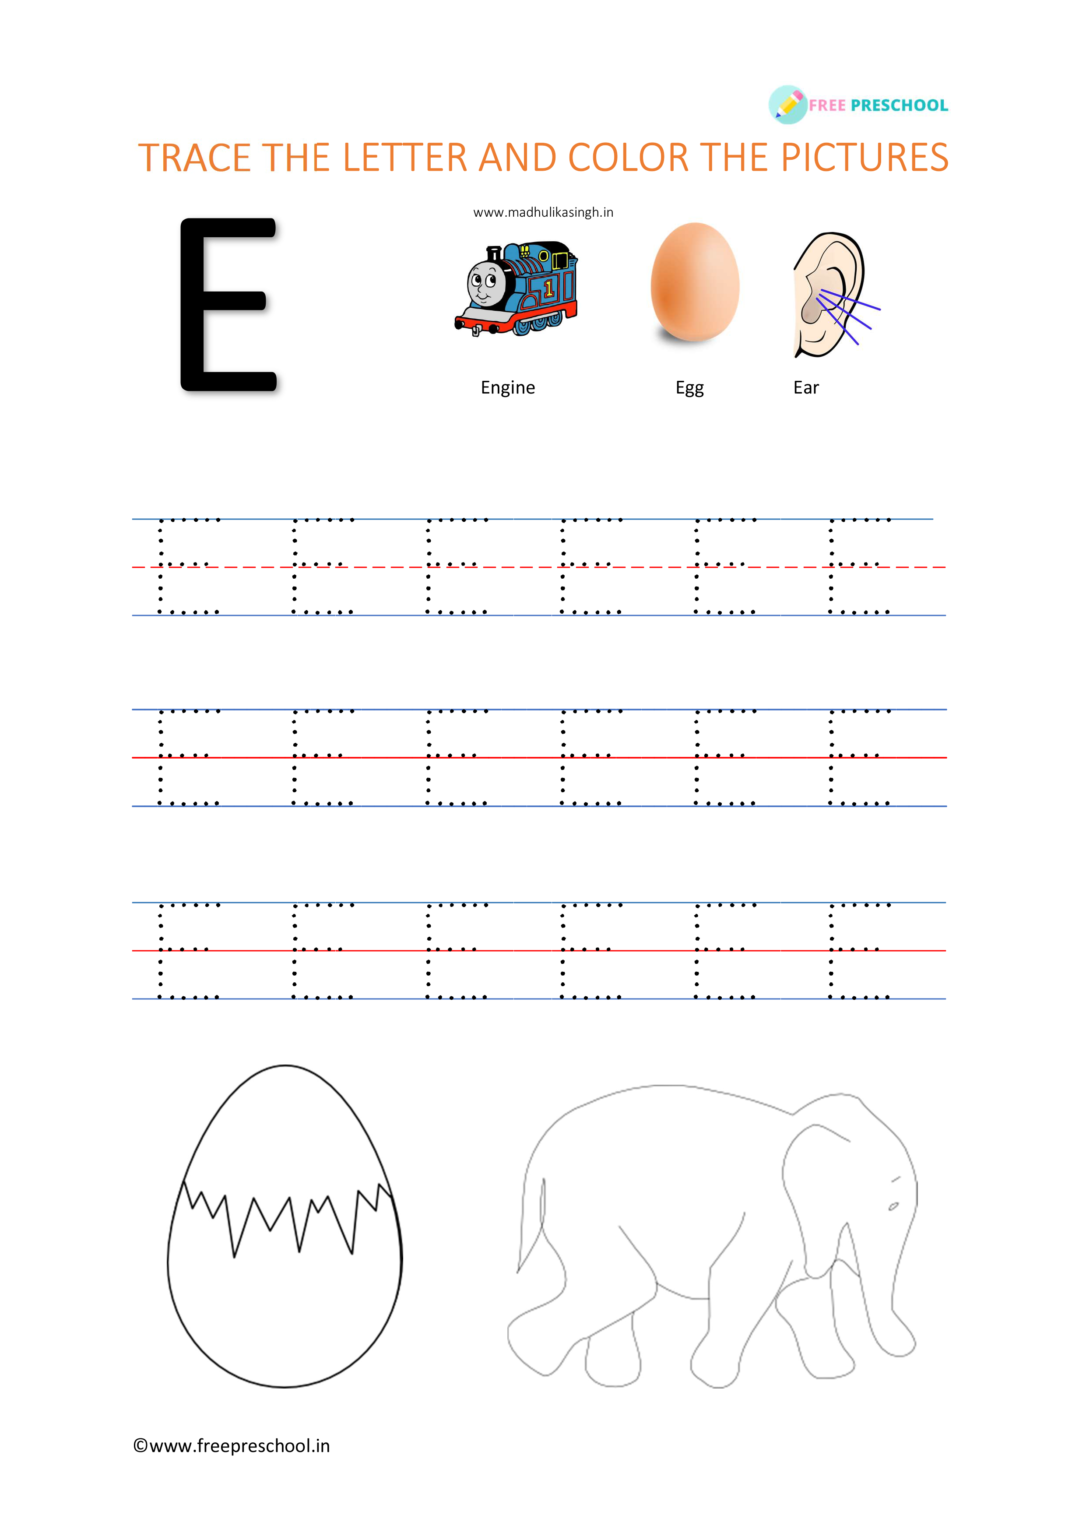 Alphabet tracing worksheets for preschool A to Z156 pages  Free Preschool